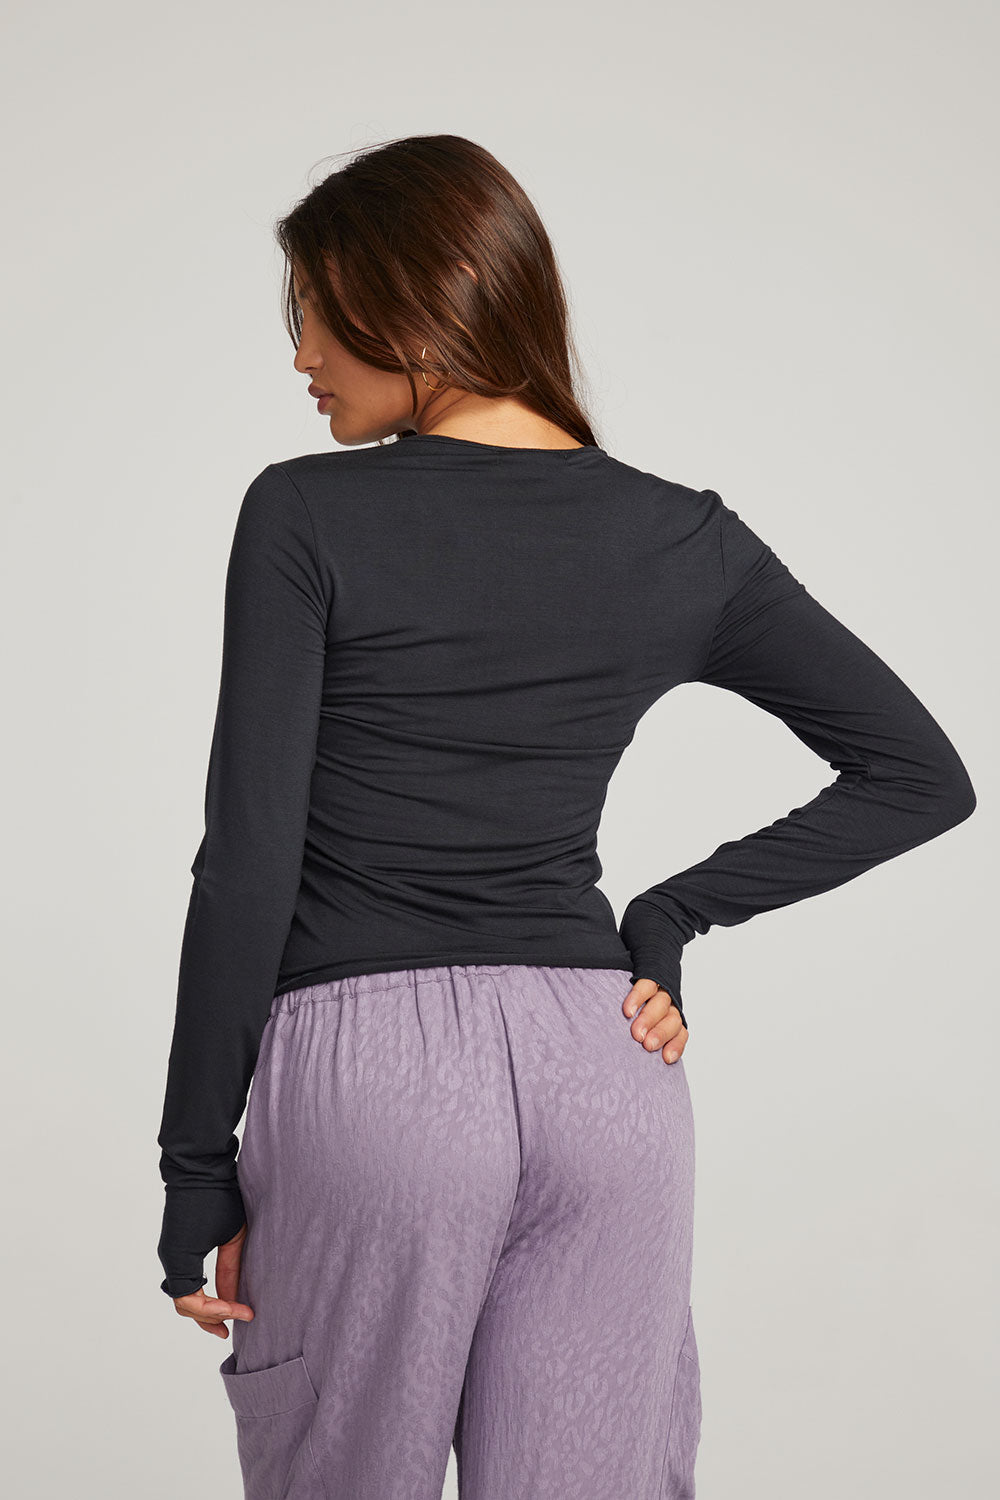 Moonlight Licorice Long Sleeve WOMENS chaserbrand